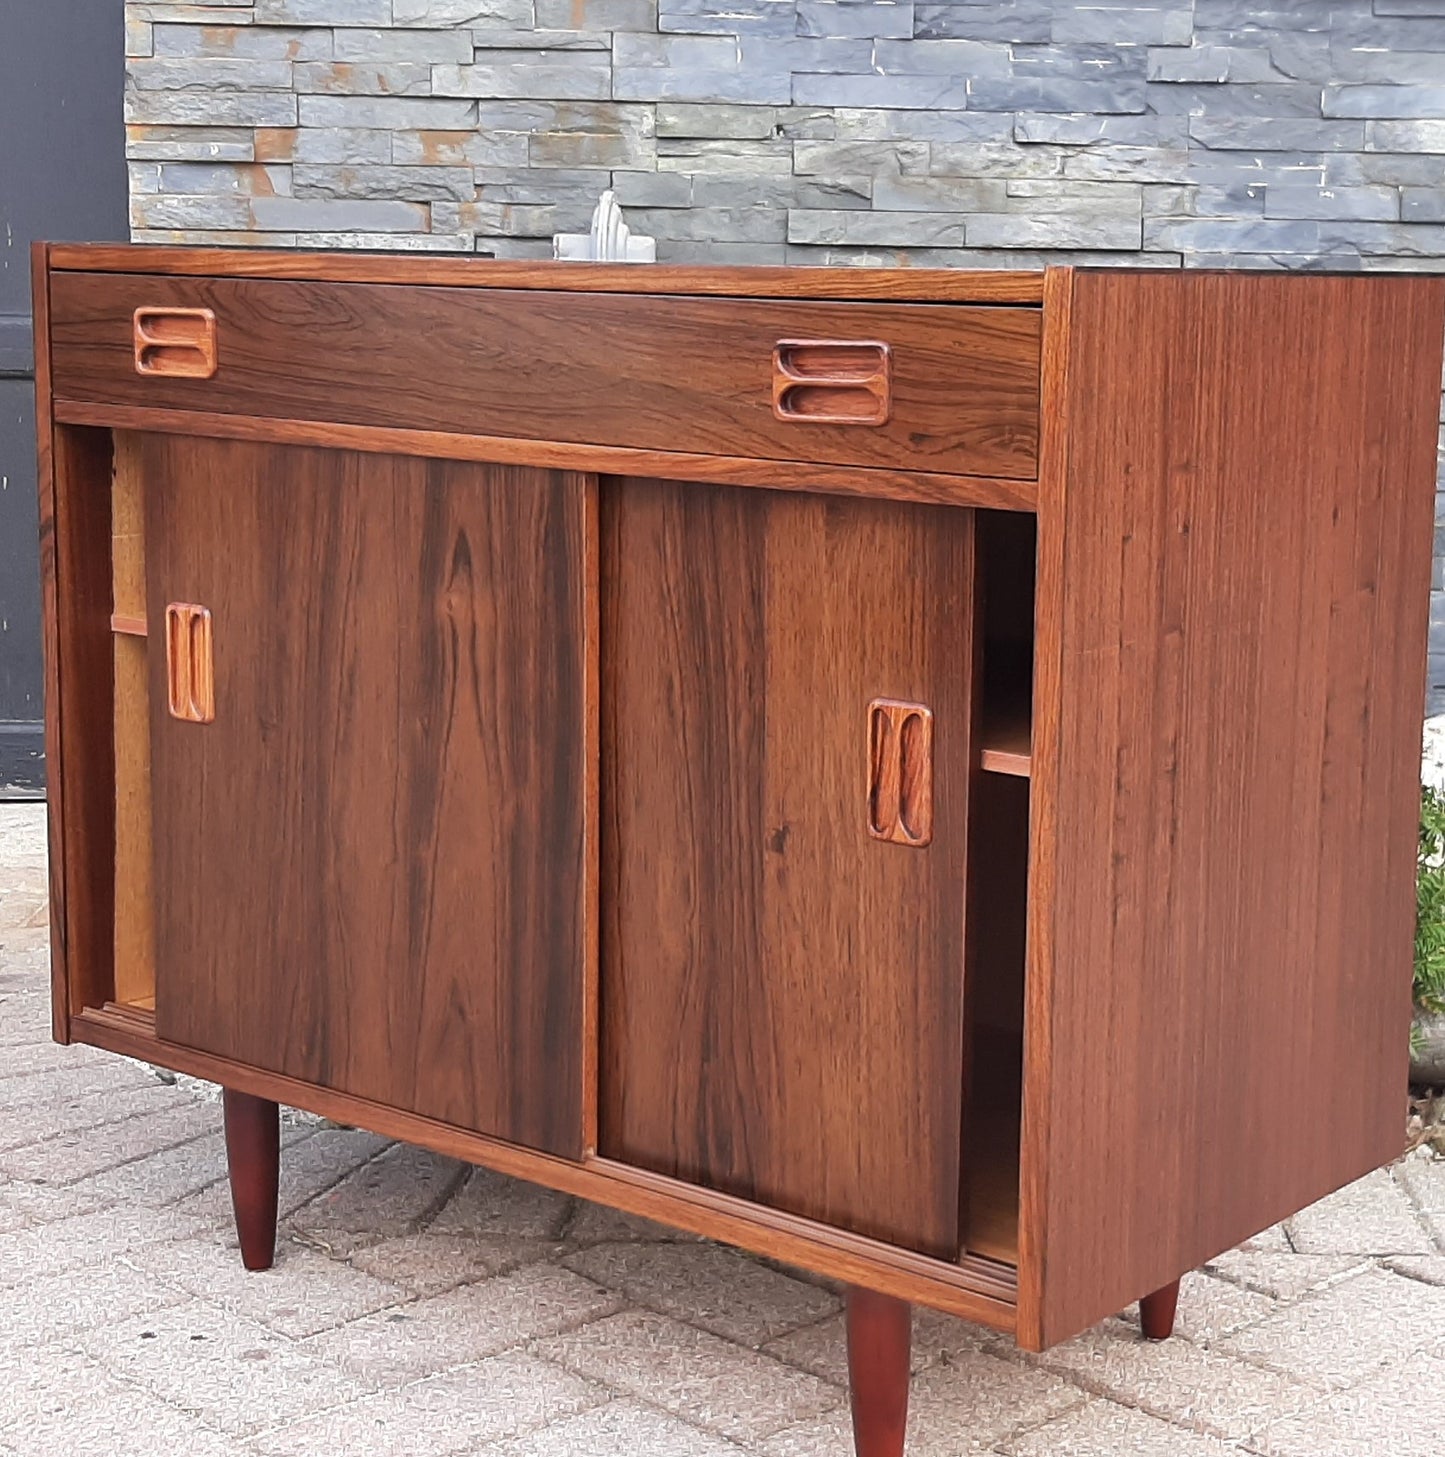 RESTORED Danish MCM Rosewood Cabinet with sliding doors & drawer, compact 34", perfect - Mid Century Modern Toronto